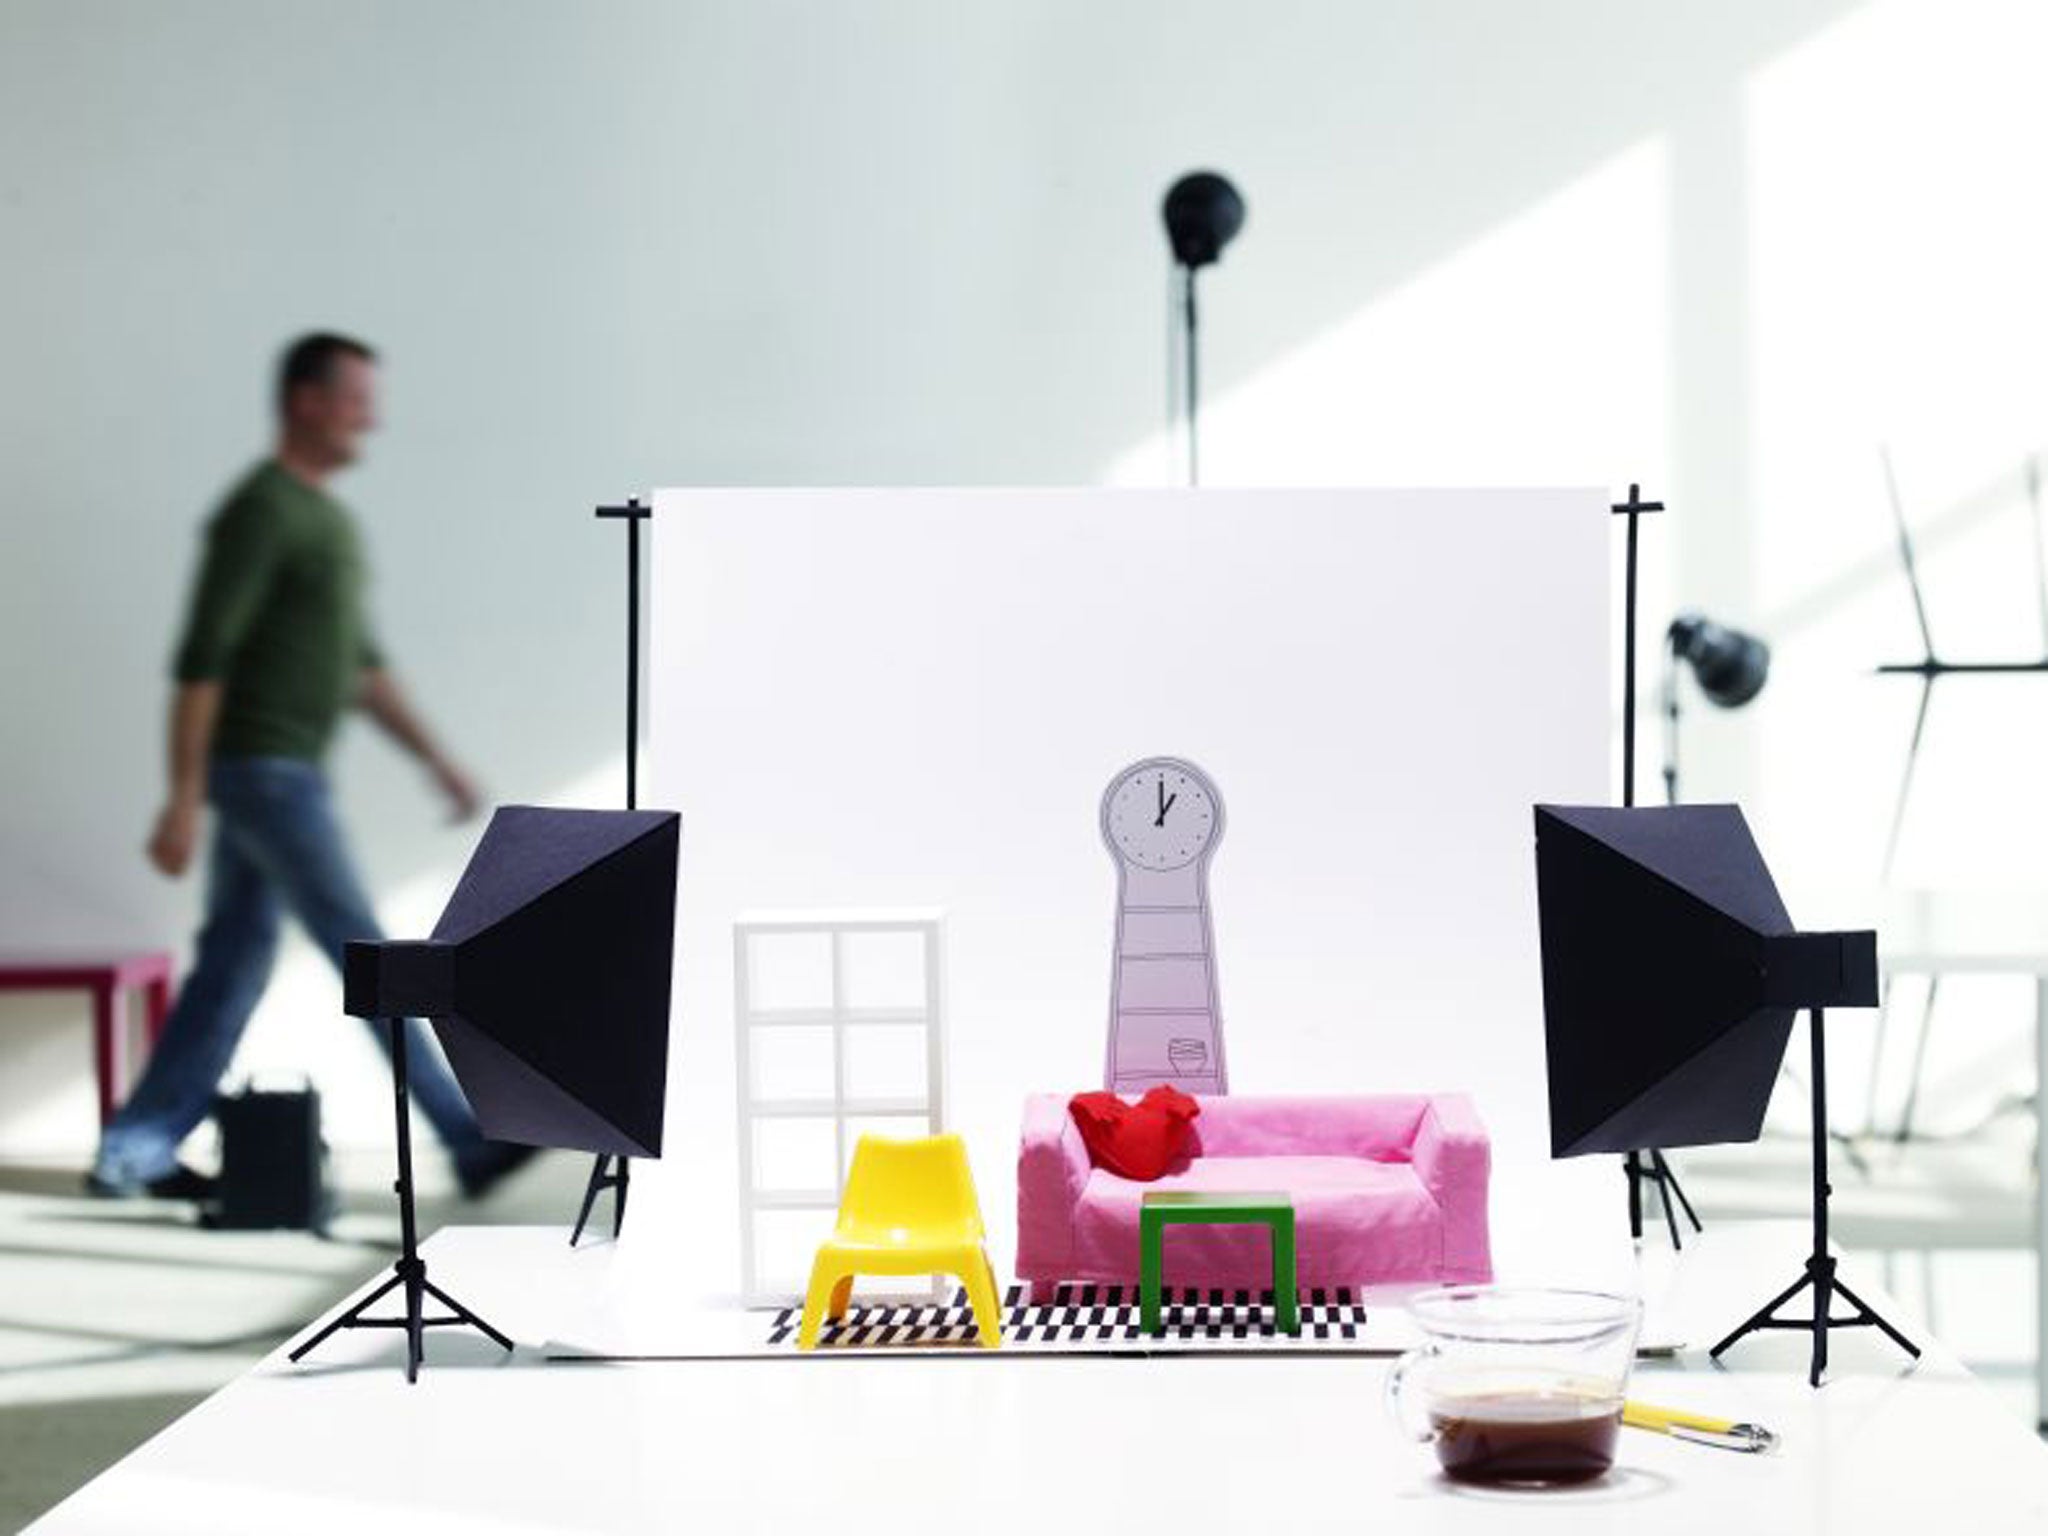 August will see the launch of Ikea’s 2014 catalogue which, for the first time, includes a set of dinky versions of some of its most famous pieces